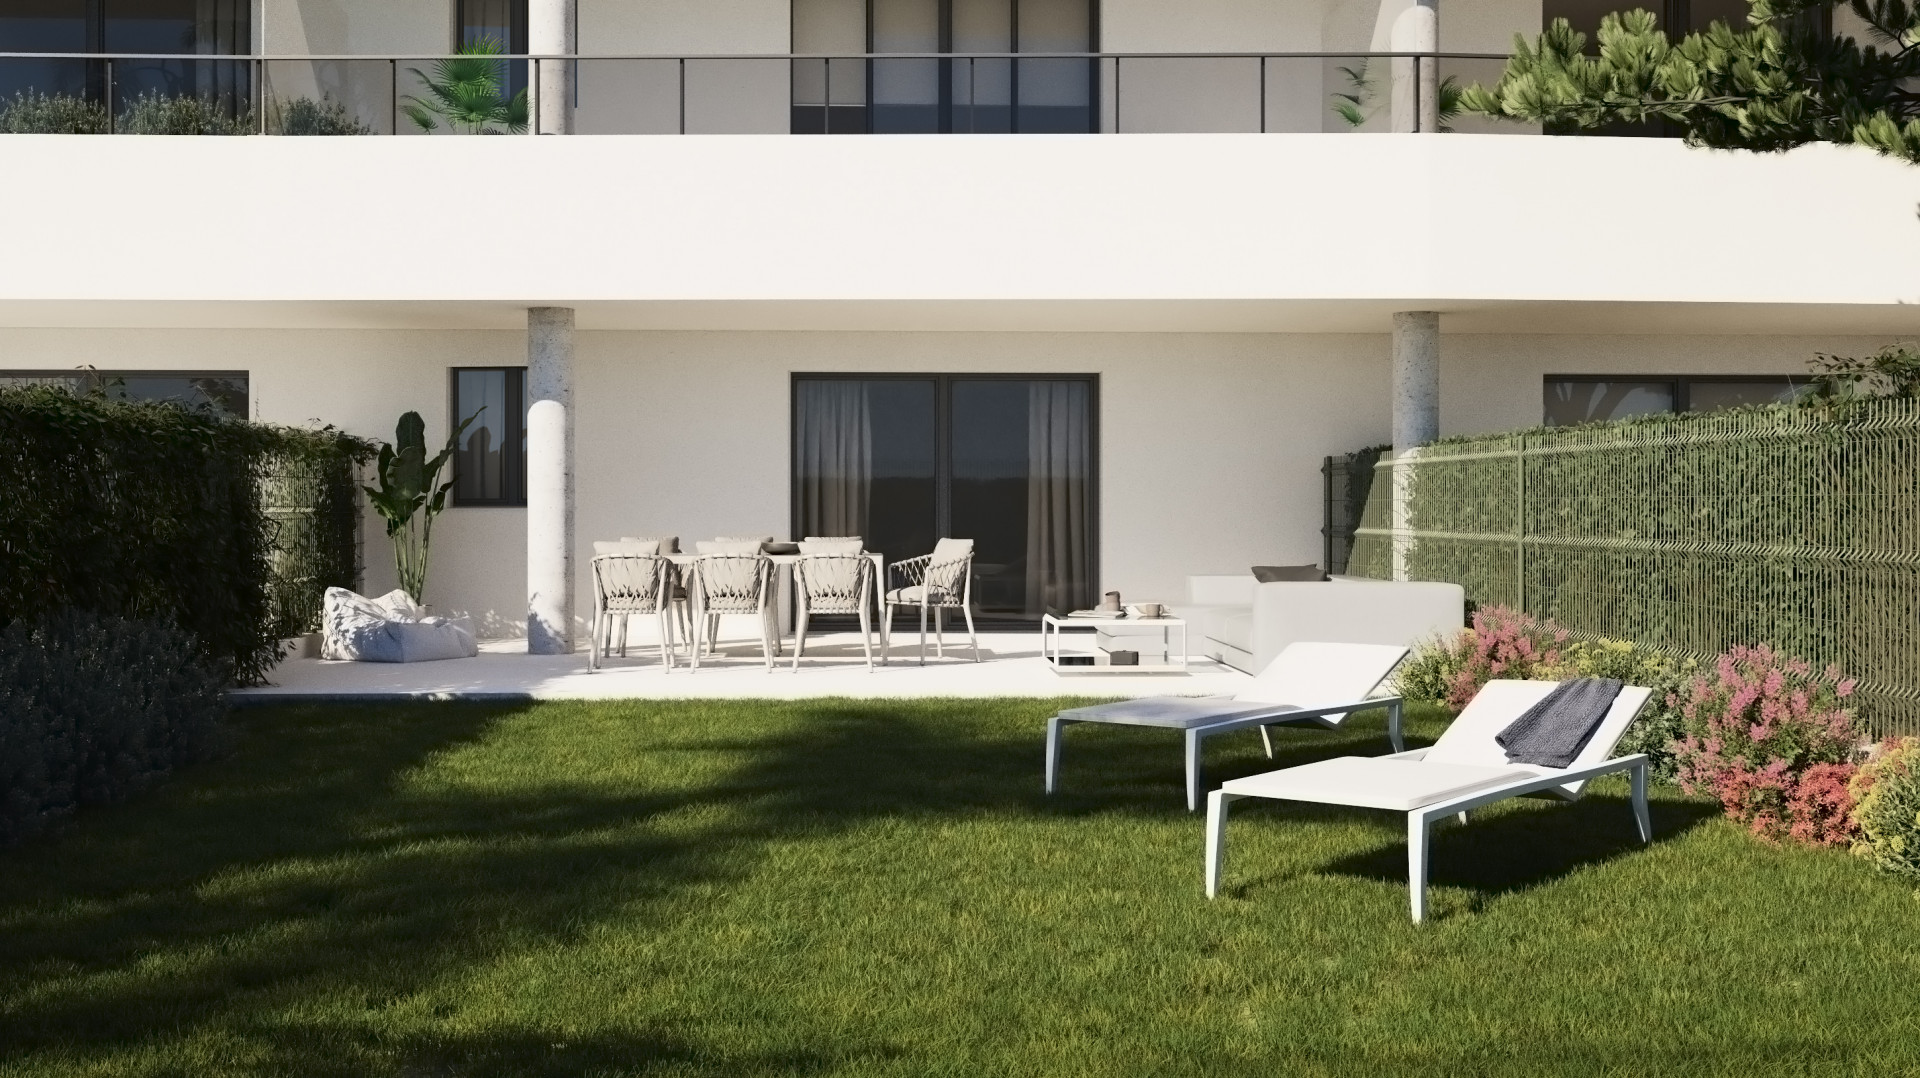 Aranya Estepona: New residential complex consisting of flats and penthouses located in Estepona. | Image 10